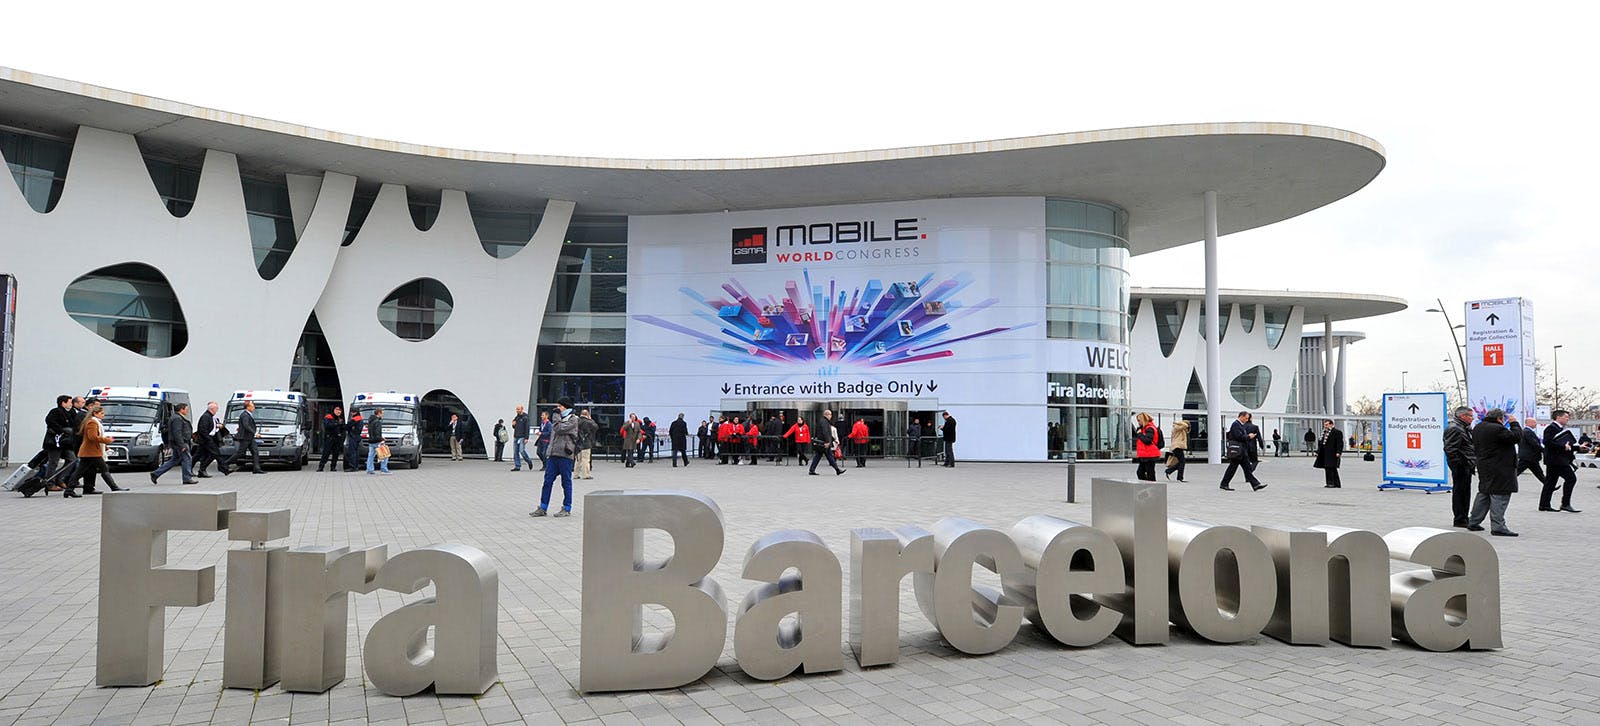 OX MWC - Mobile World Congress